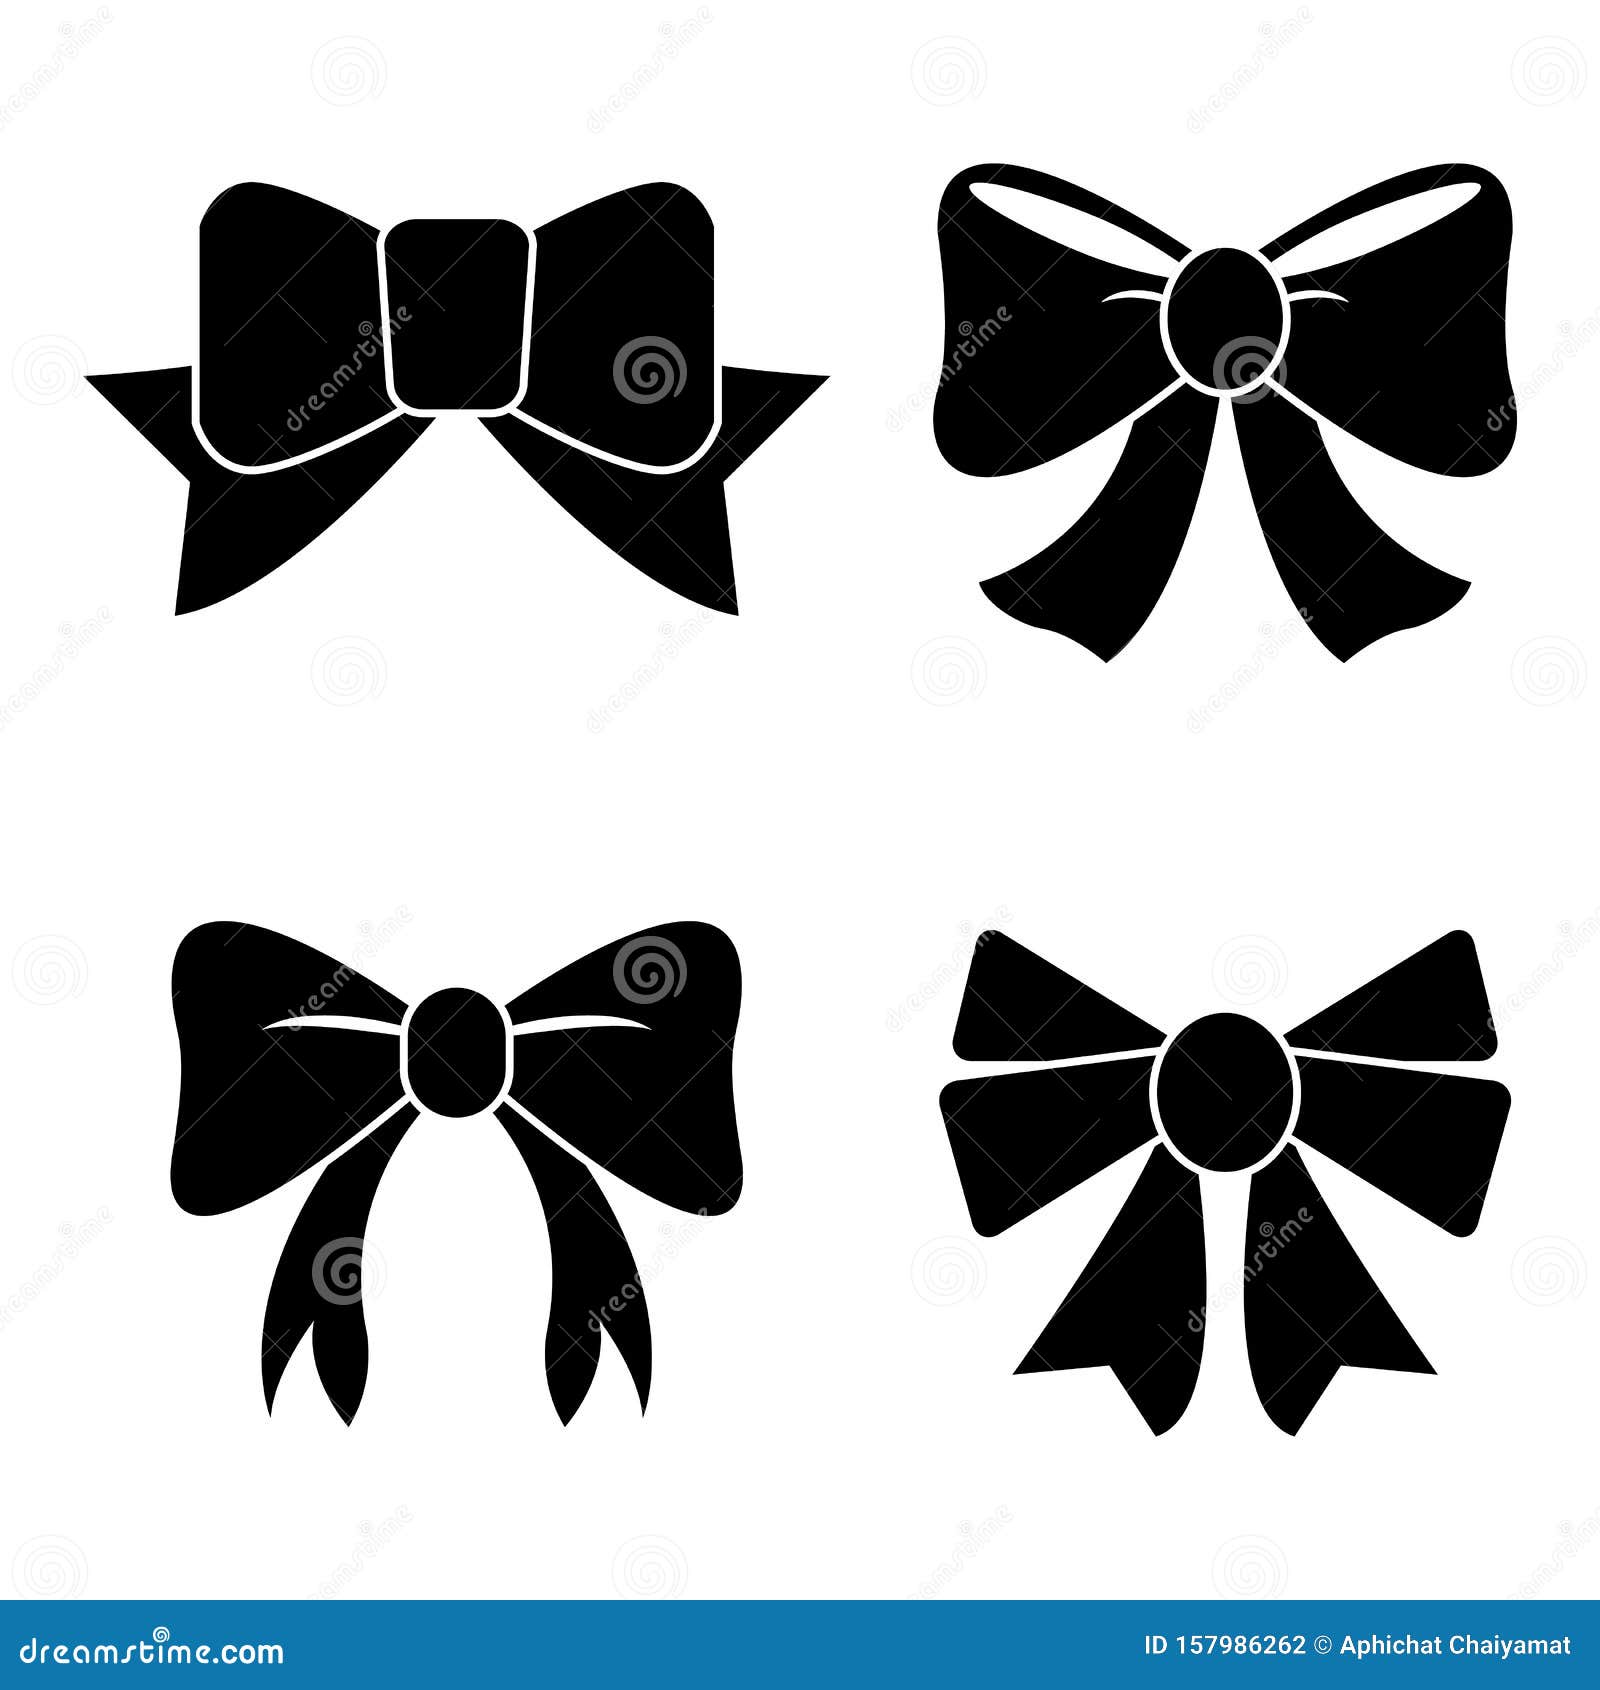  sillouettes,set of graphical decorative bows,